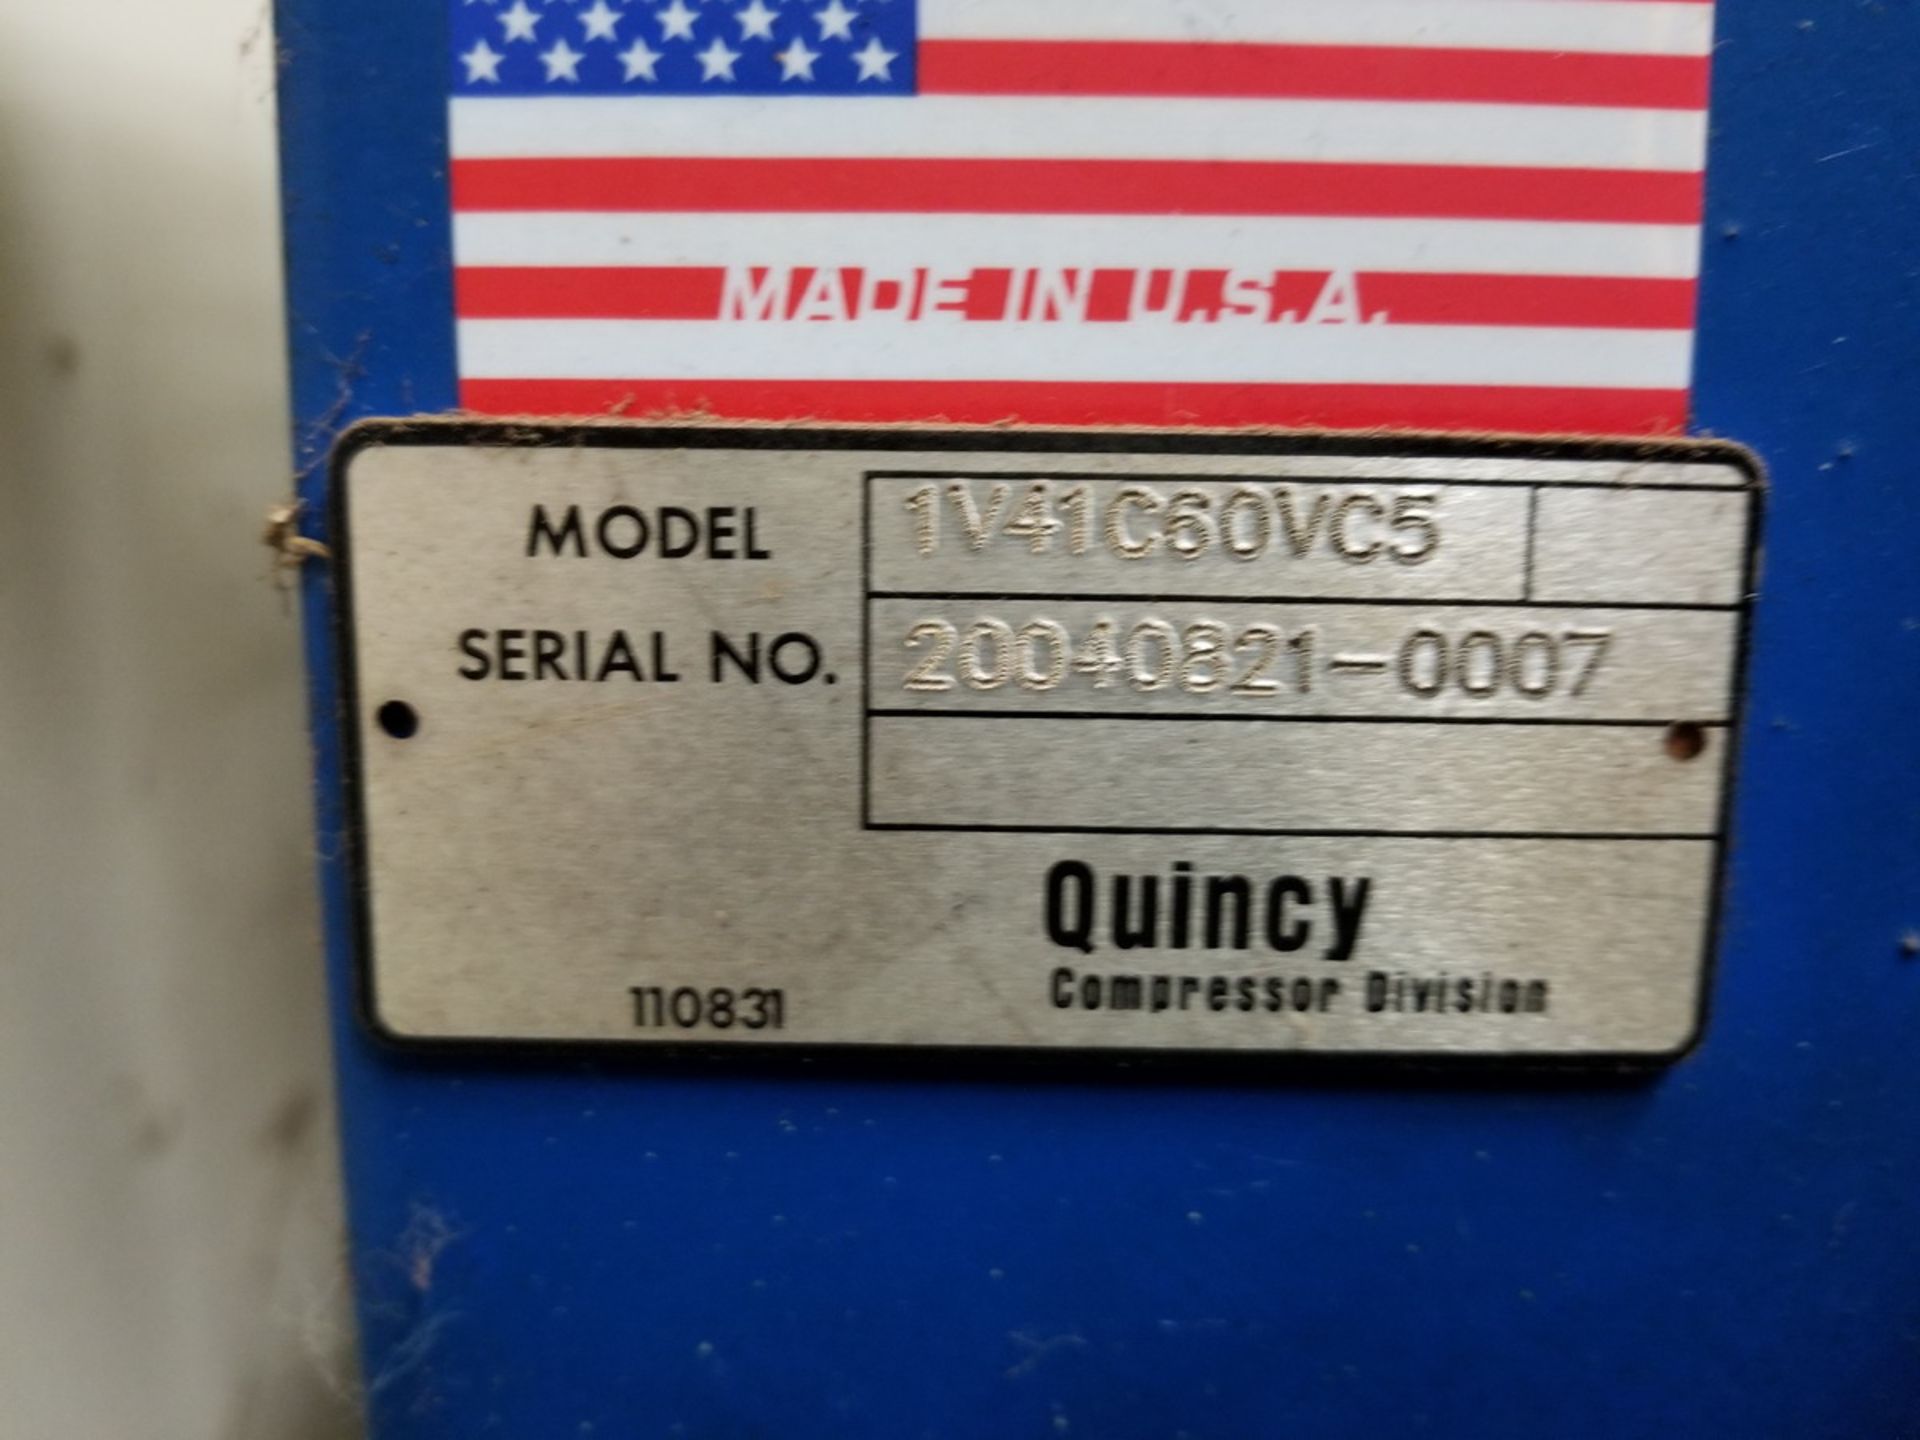 Quincy 1V41C60VC5 Air Compresor - Image 4 of 4